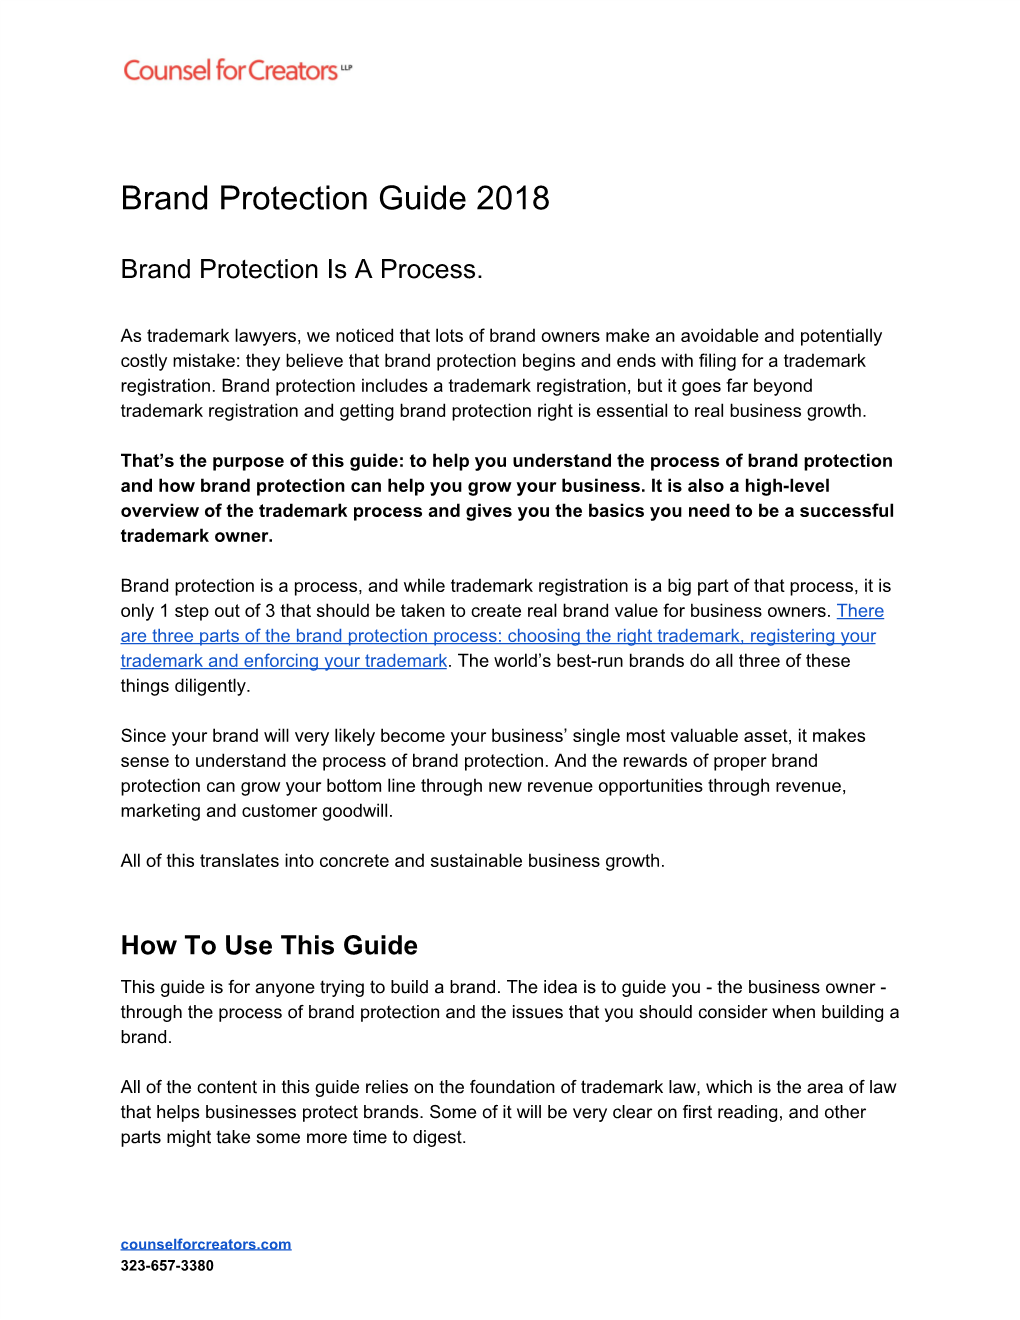 Brand Protection Guide 2018